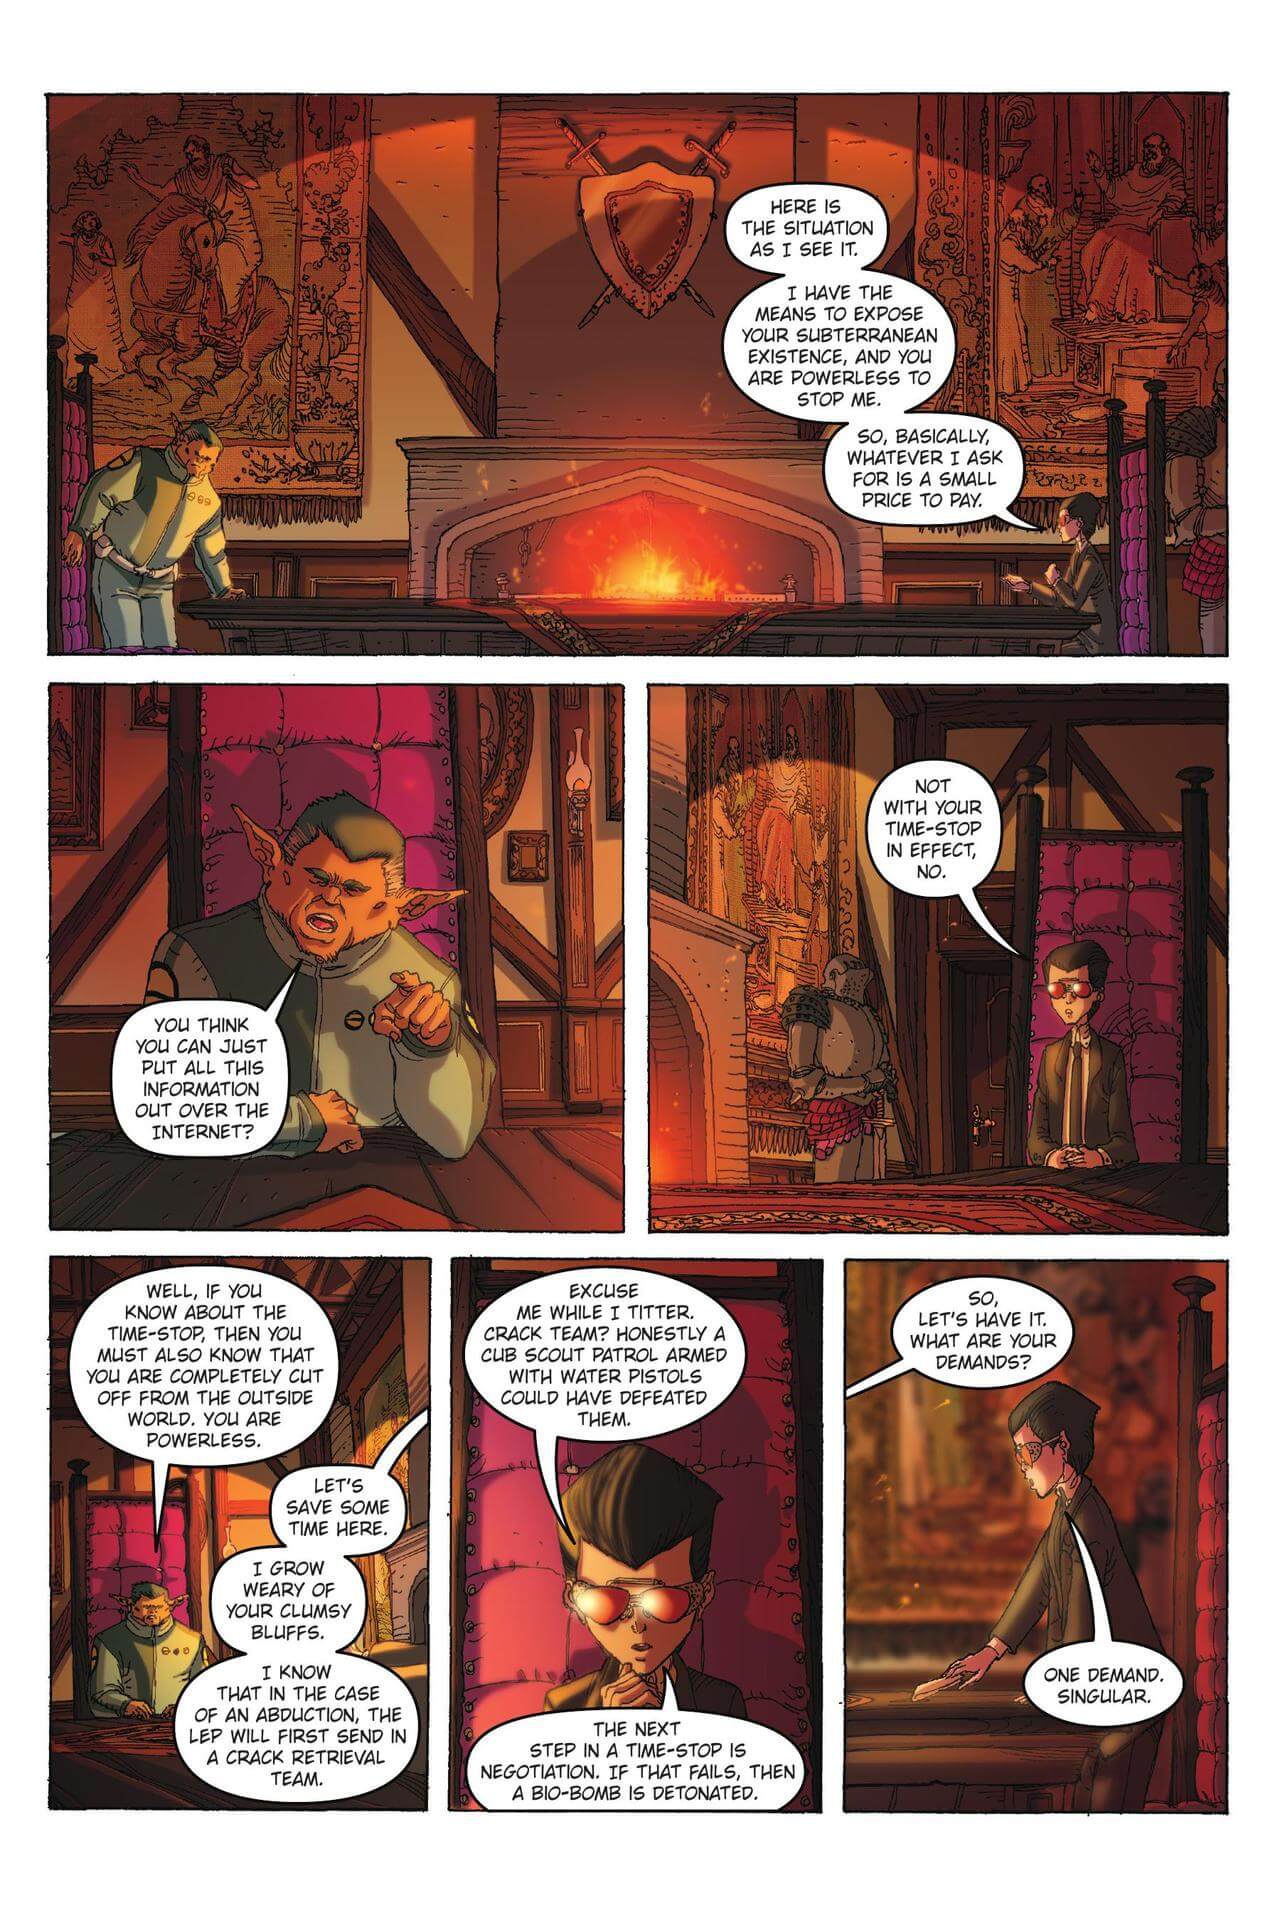 page 63 of artemis fowl the graphic novel